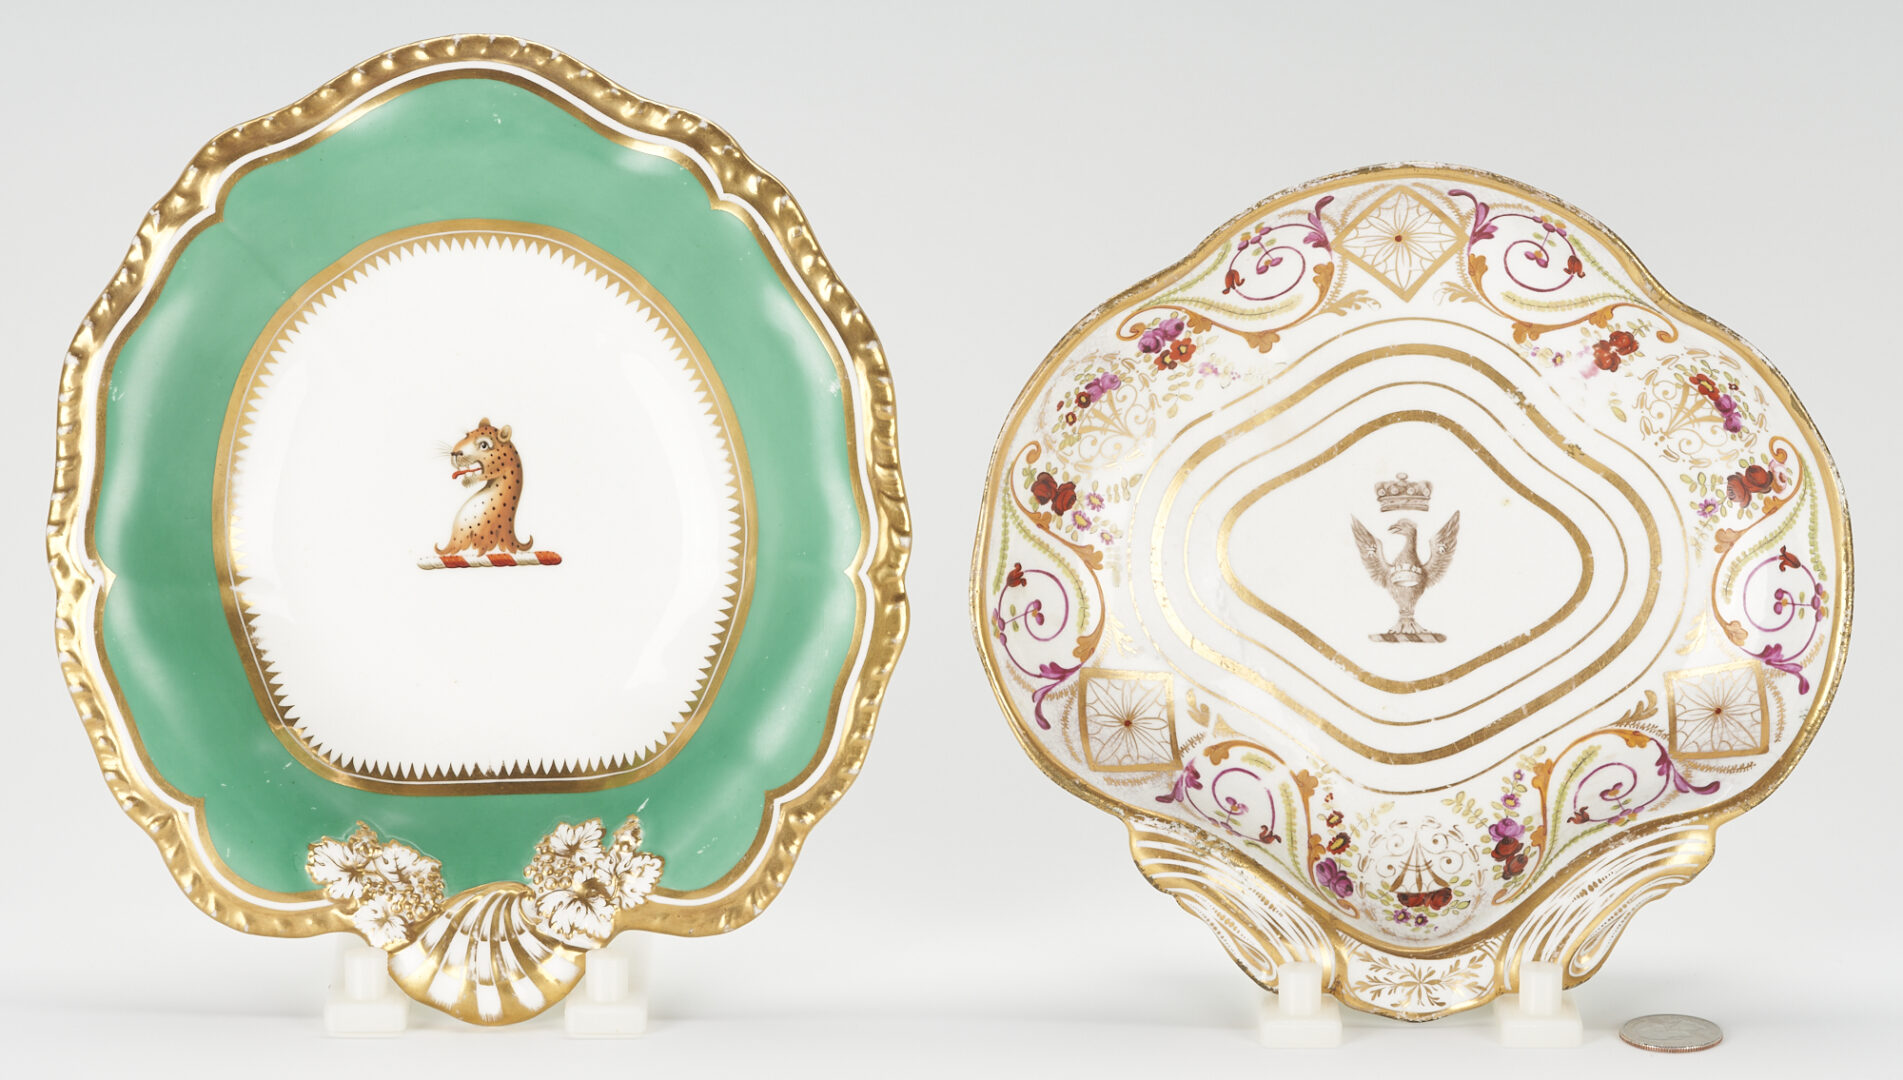 Lot 856: 5 Continental Porcelain Items Incl Armorial Dishes, Needle Case, and 2 Perfume Bottles